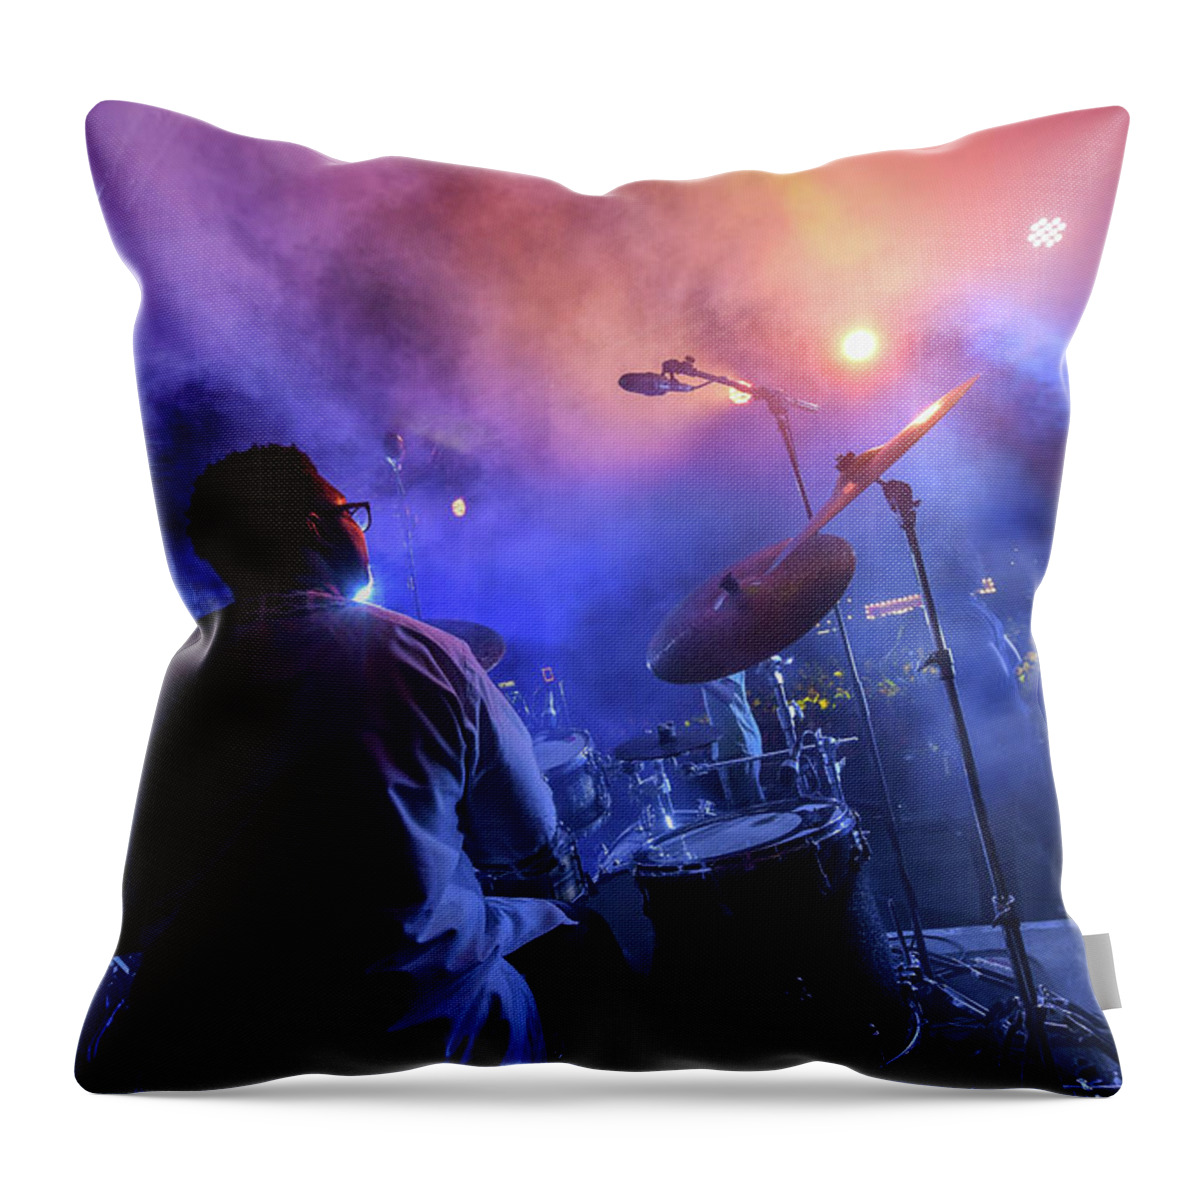 Maiden Voyage Festival Throw Pillow featuring the photograph Steam at Maiden Voyage Festival by Andrew Lalchan